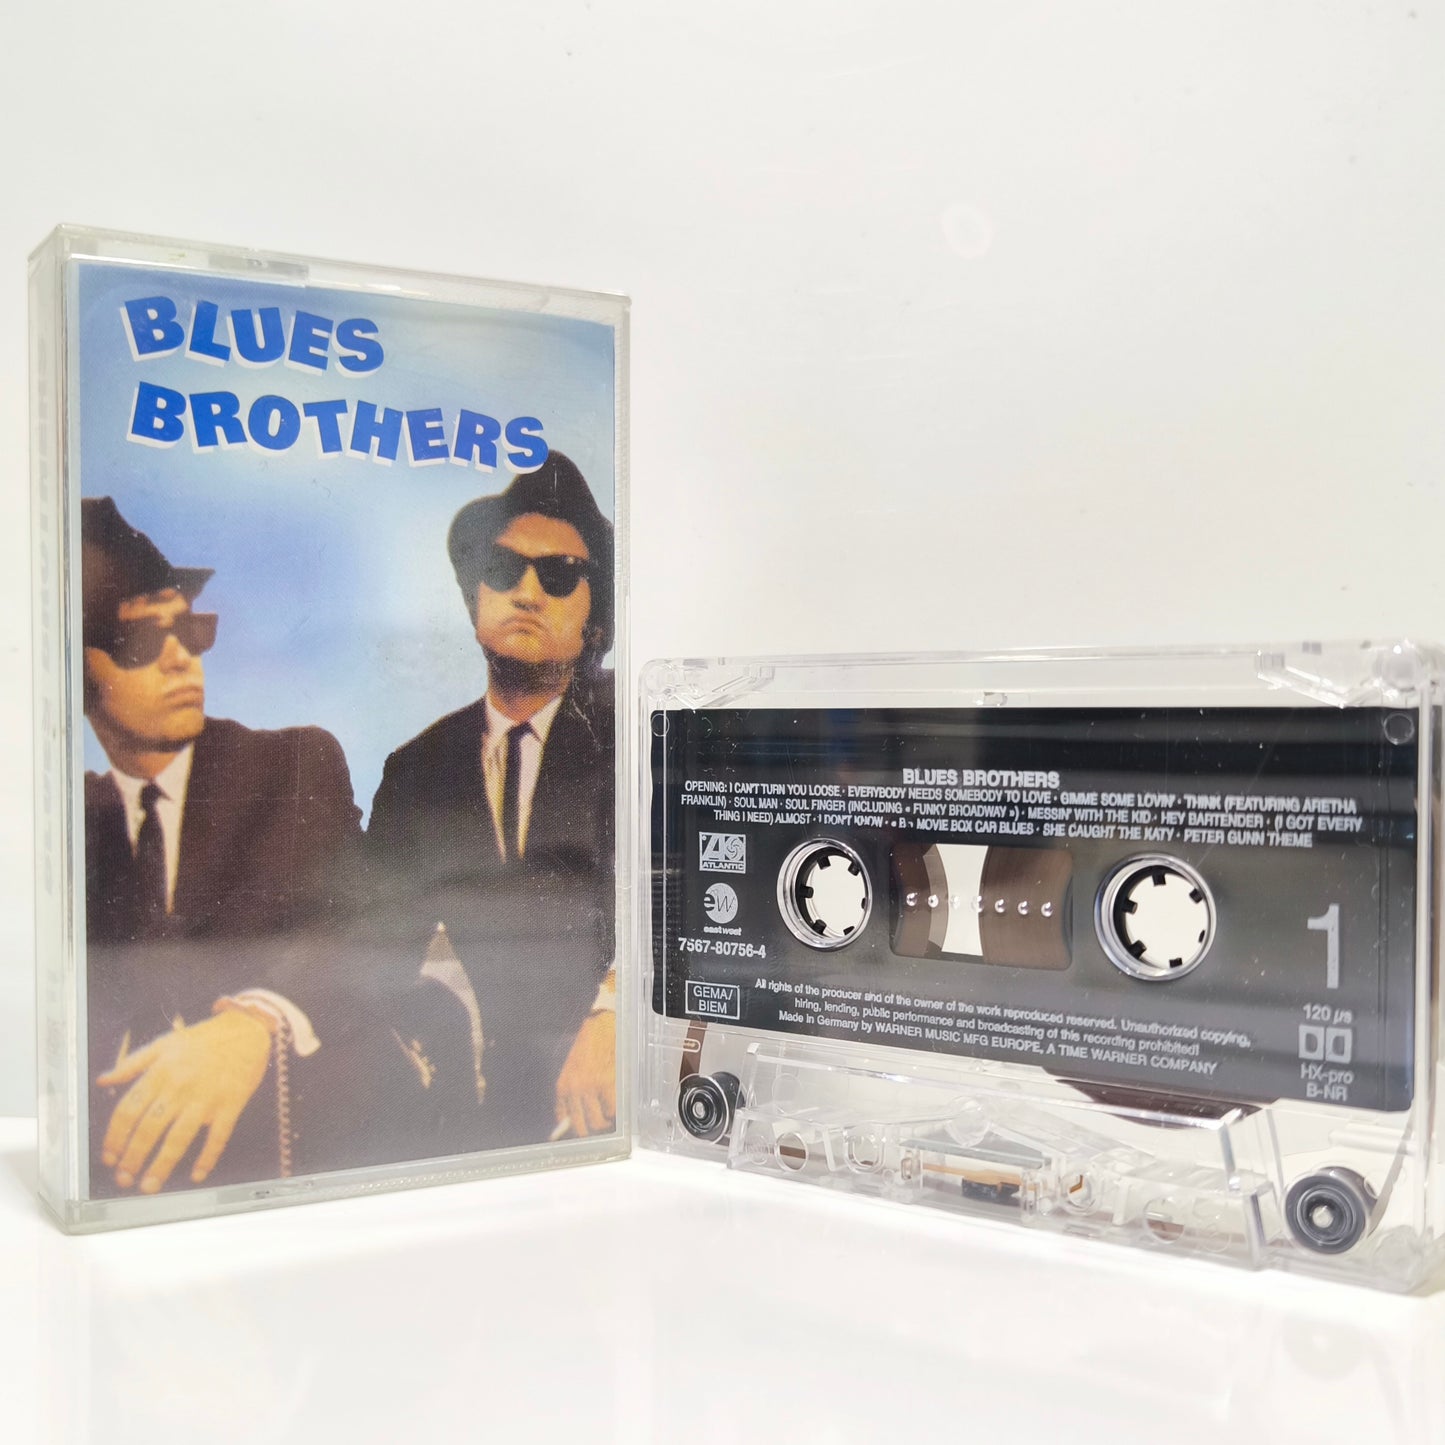 BLUES BROTHERS - Blues Brothers